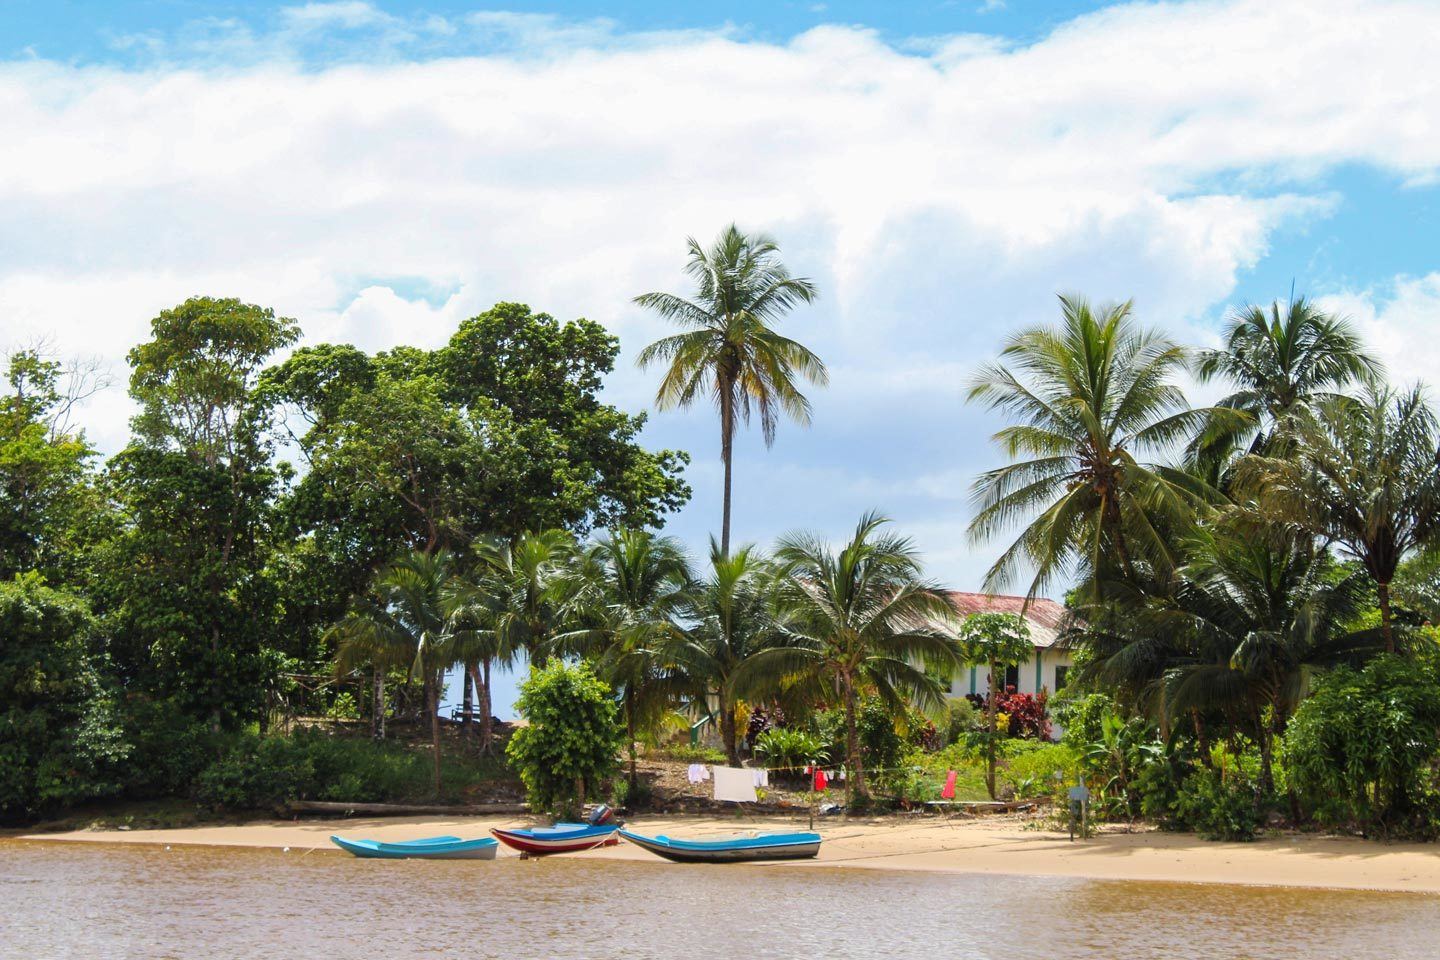 Things to do in Guyana that You Can't Miss